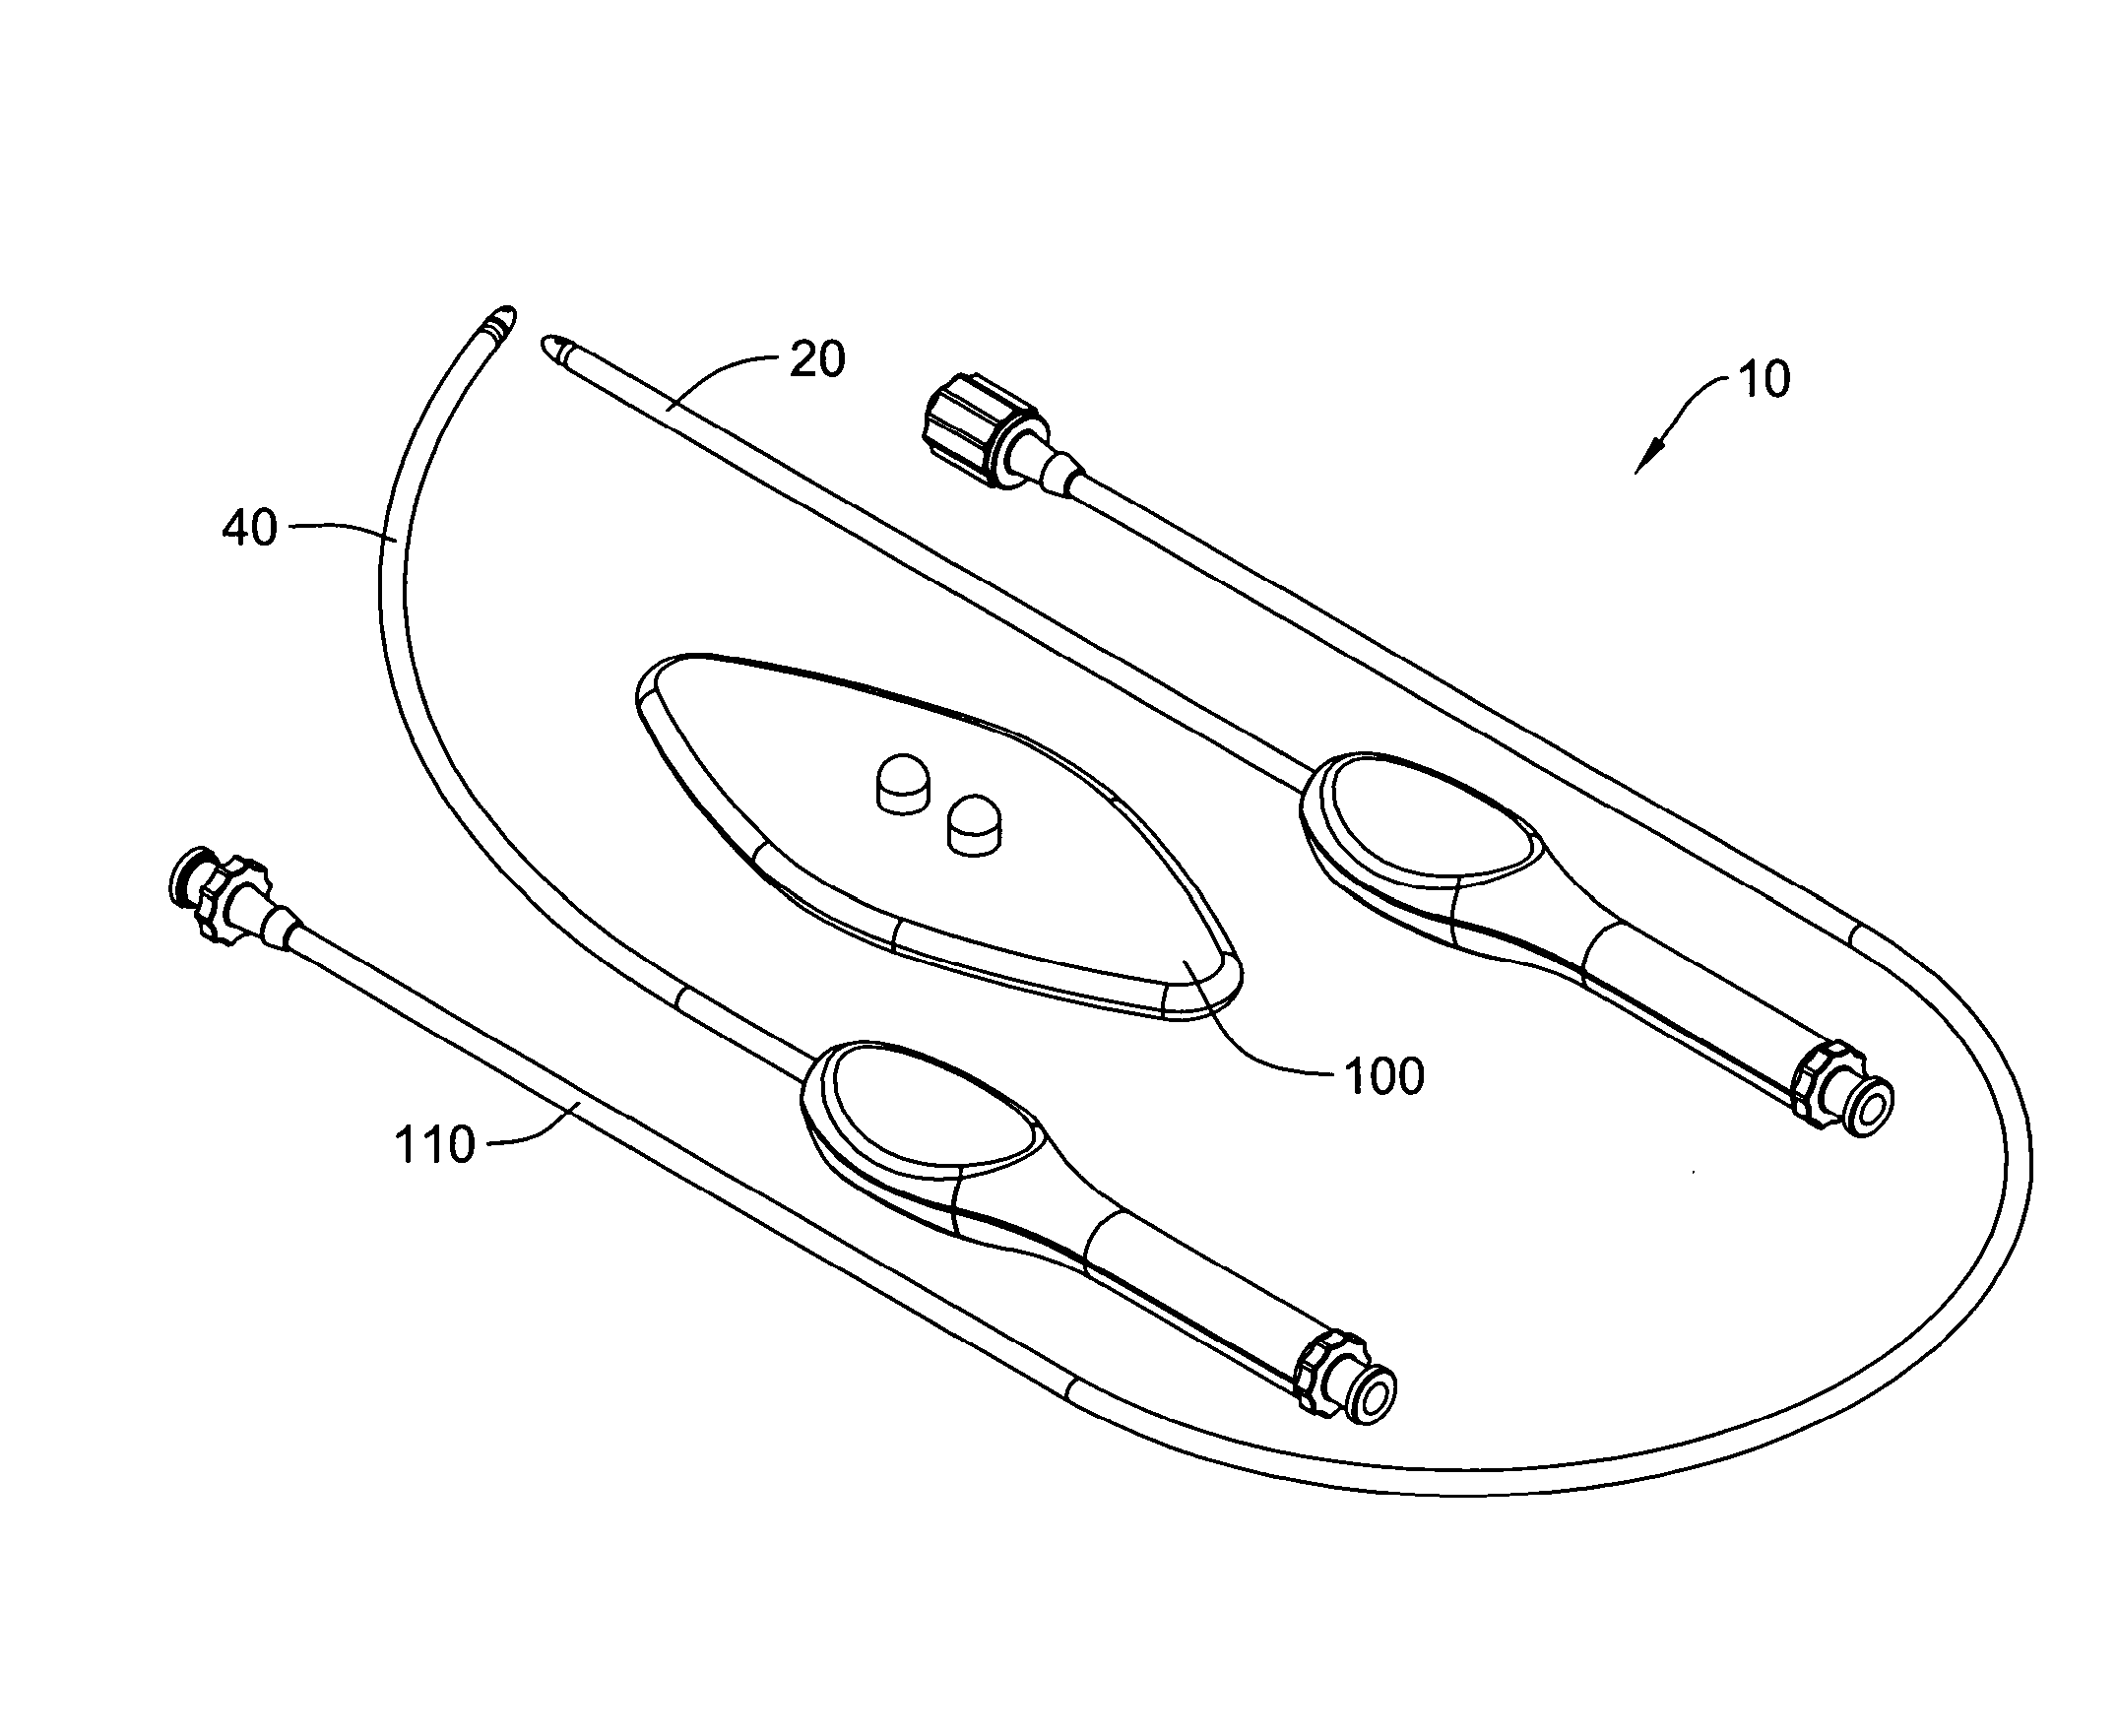 Apparatus for subcutaneous electrode insertion